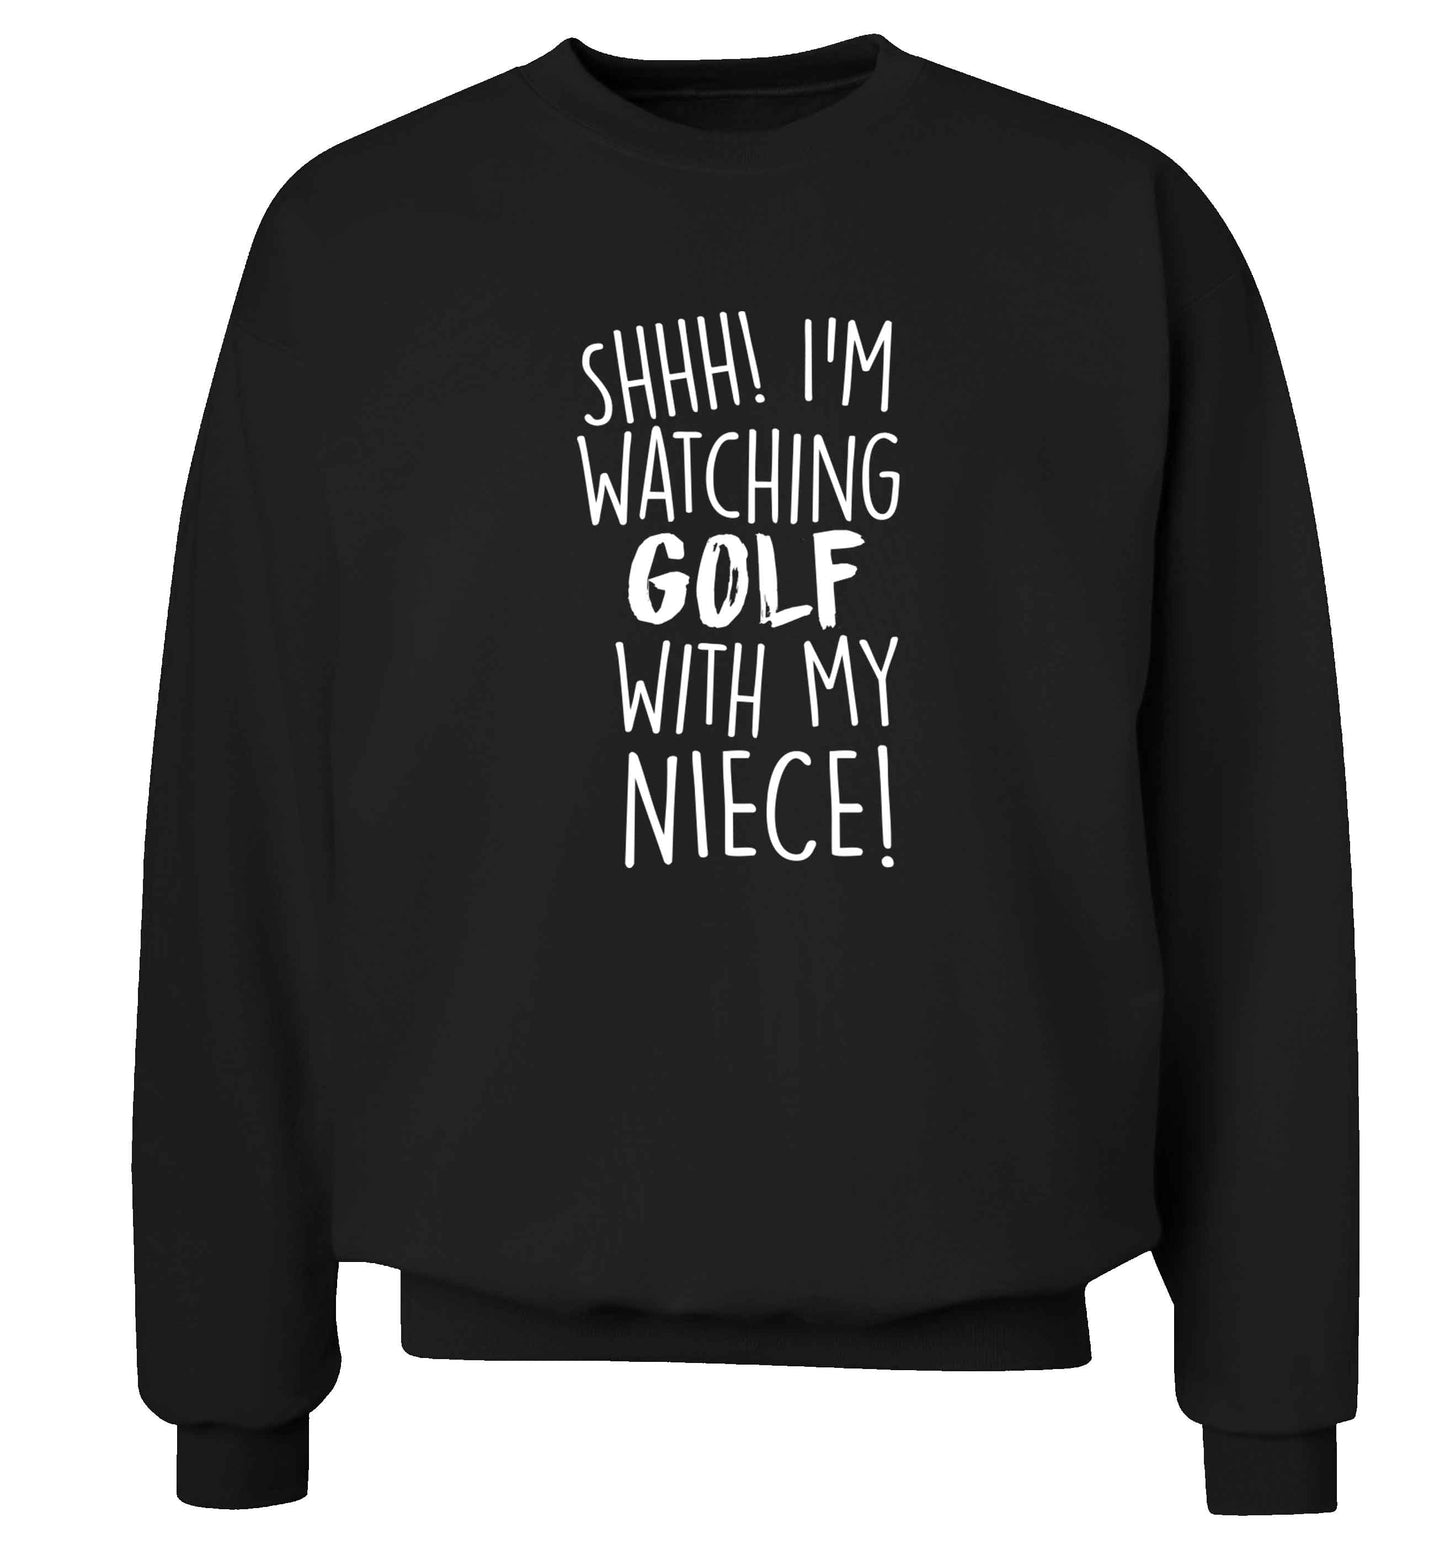 Shh I'm watching golf with my niece Adult's unisex black Sweater 2XL